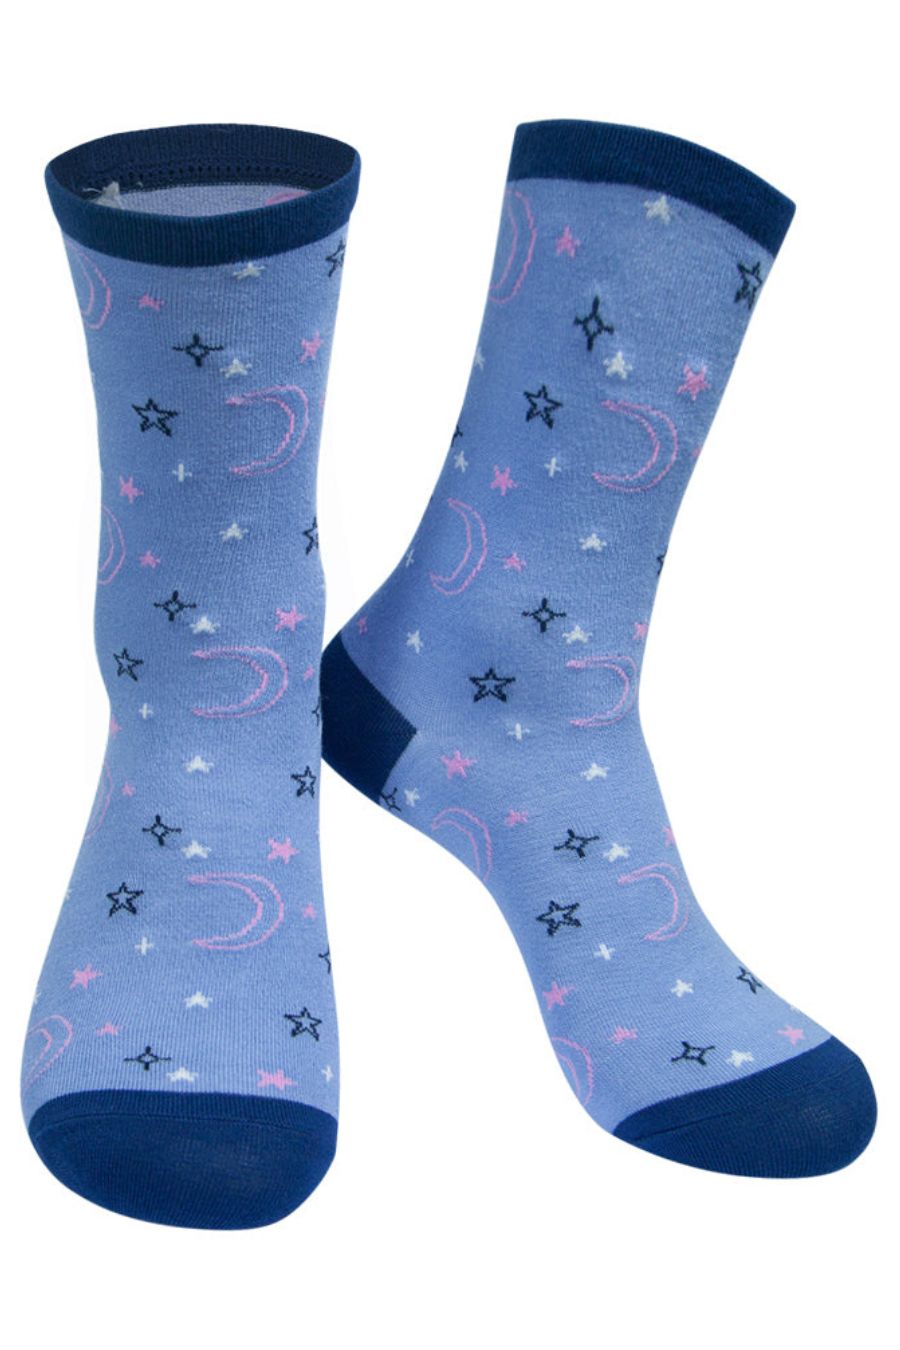 lilac, navy blue scattered star and moon pattern bamboo socks